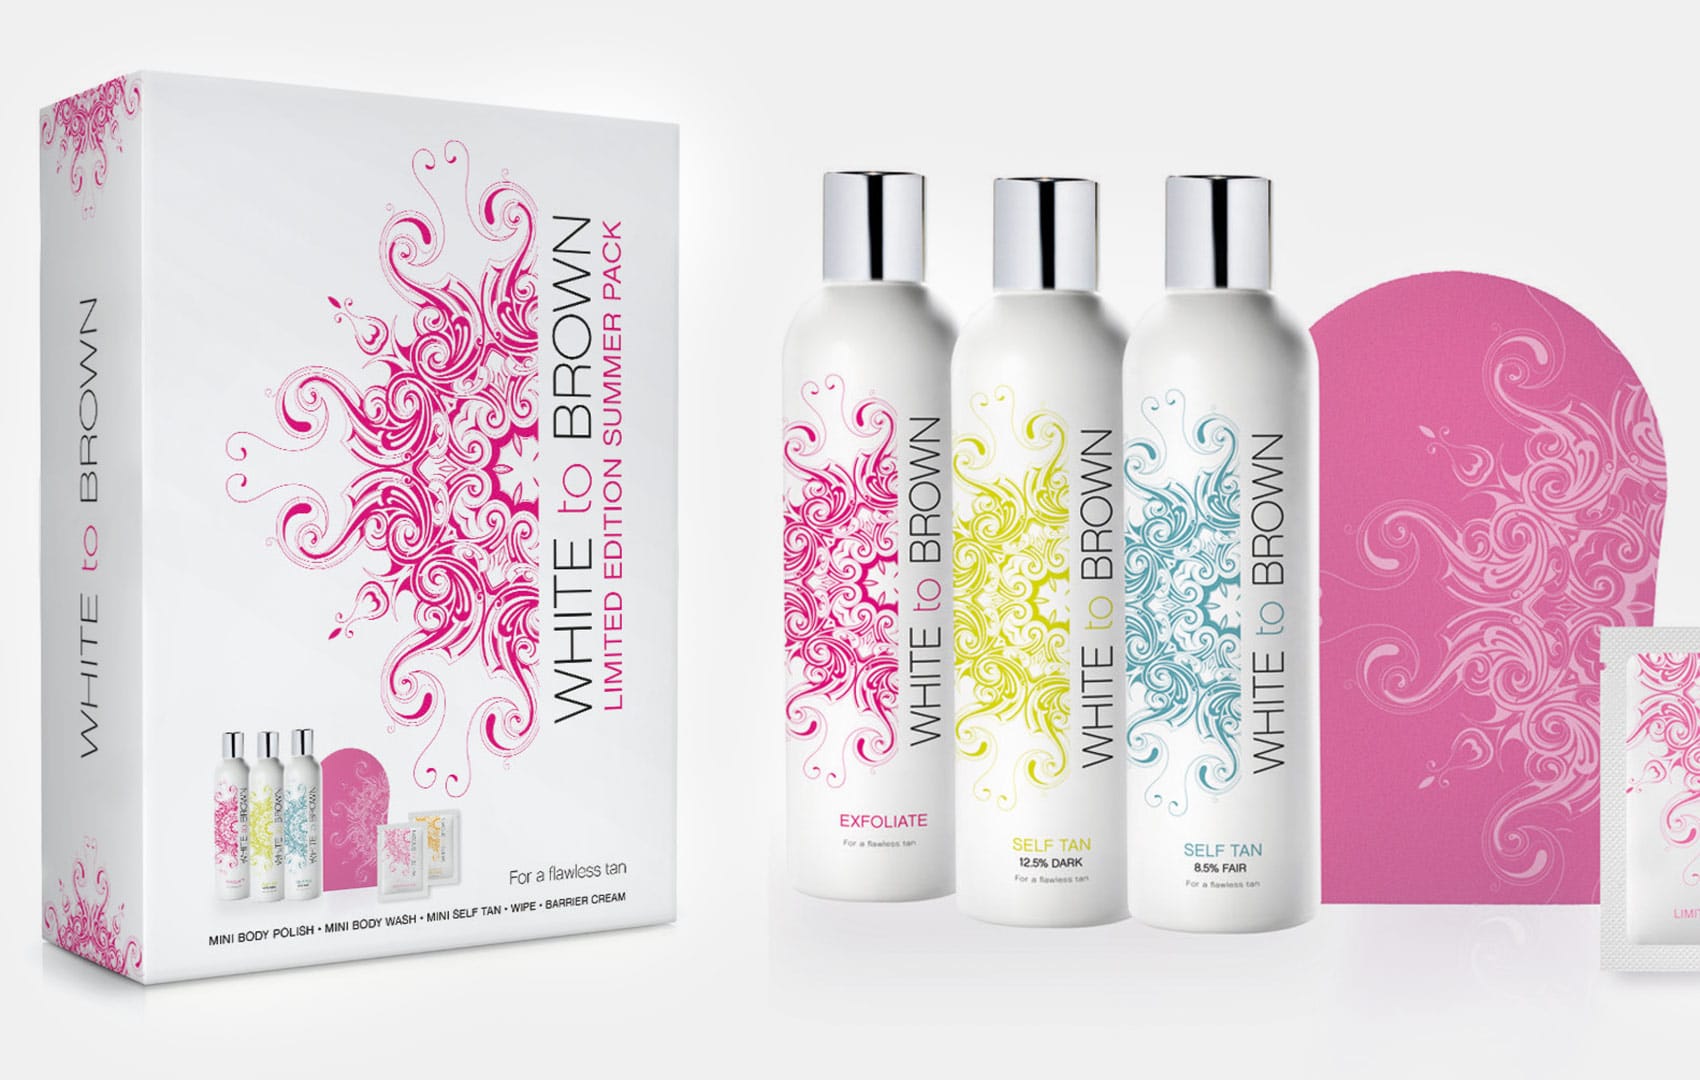 White to Brown Branding and Packaging Design Summer Campaign